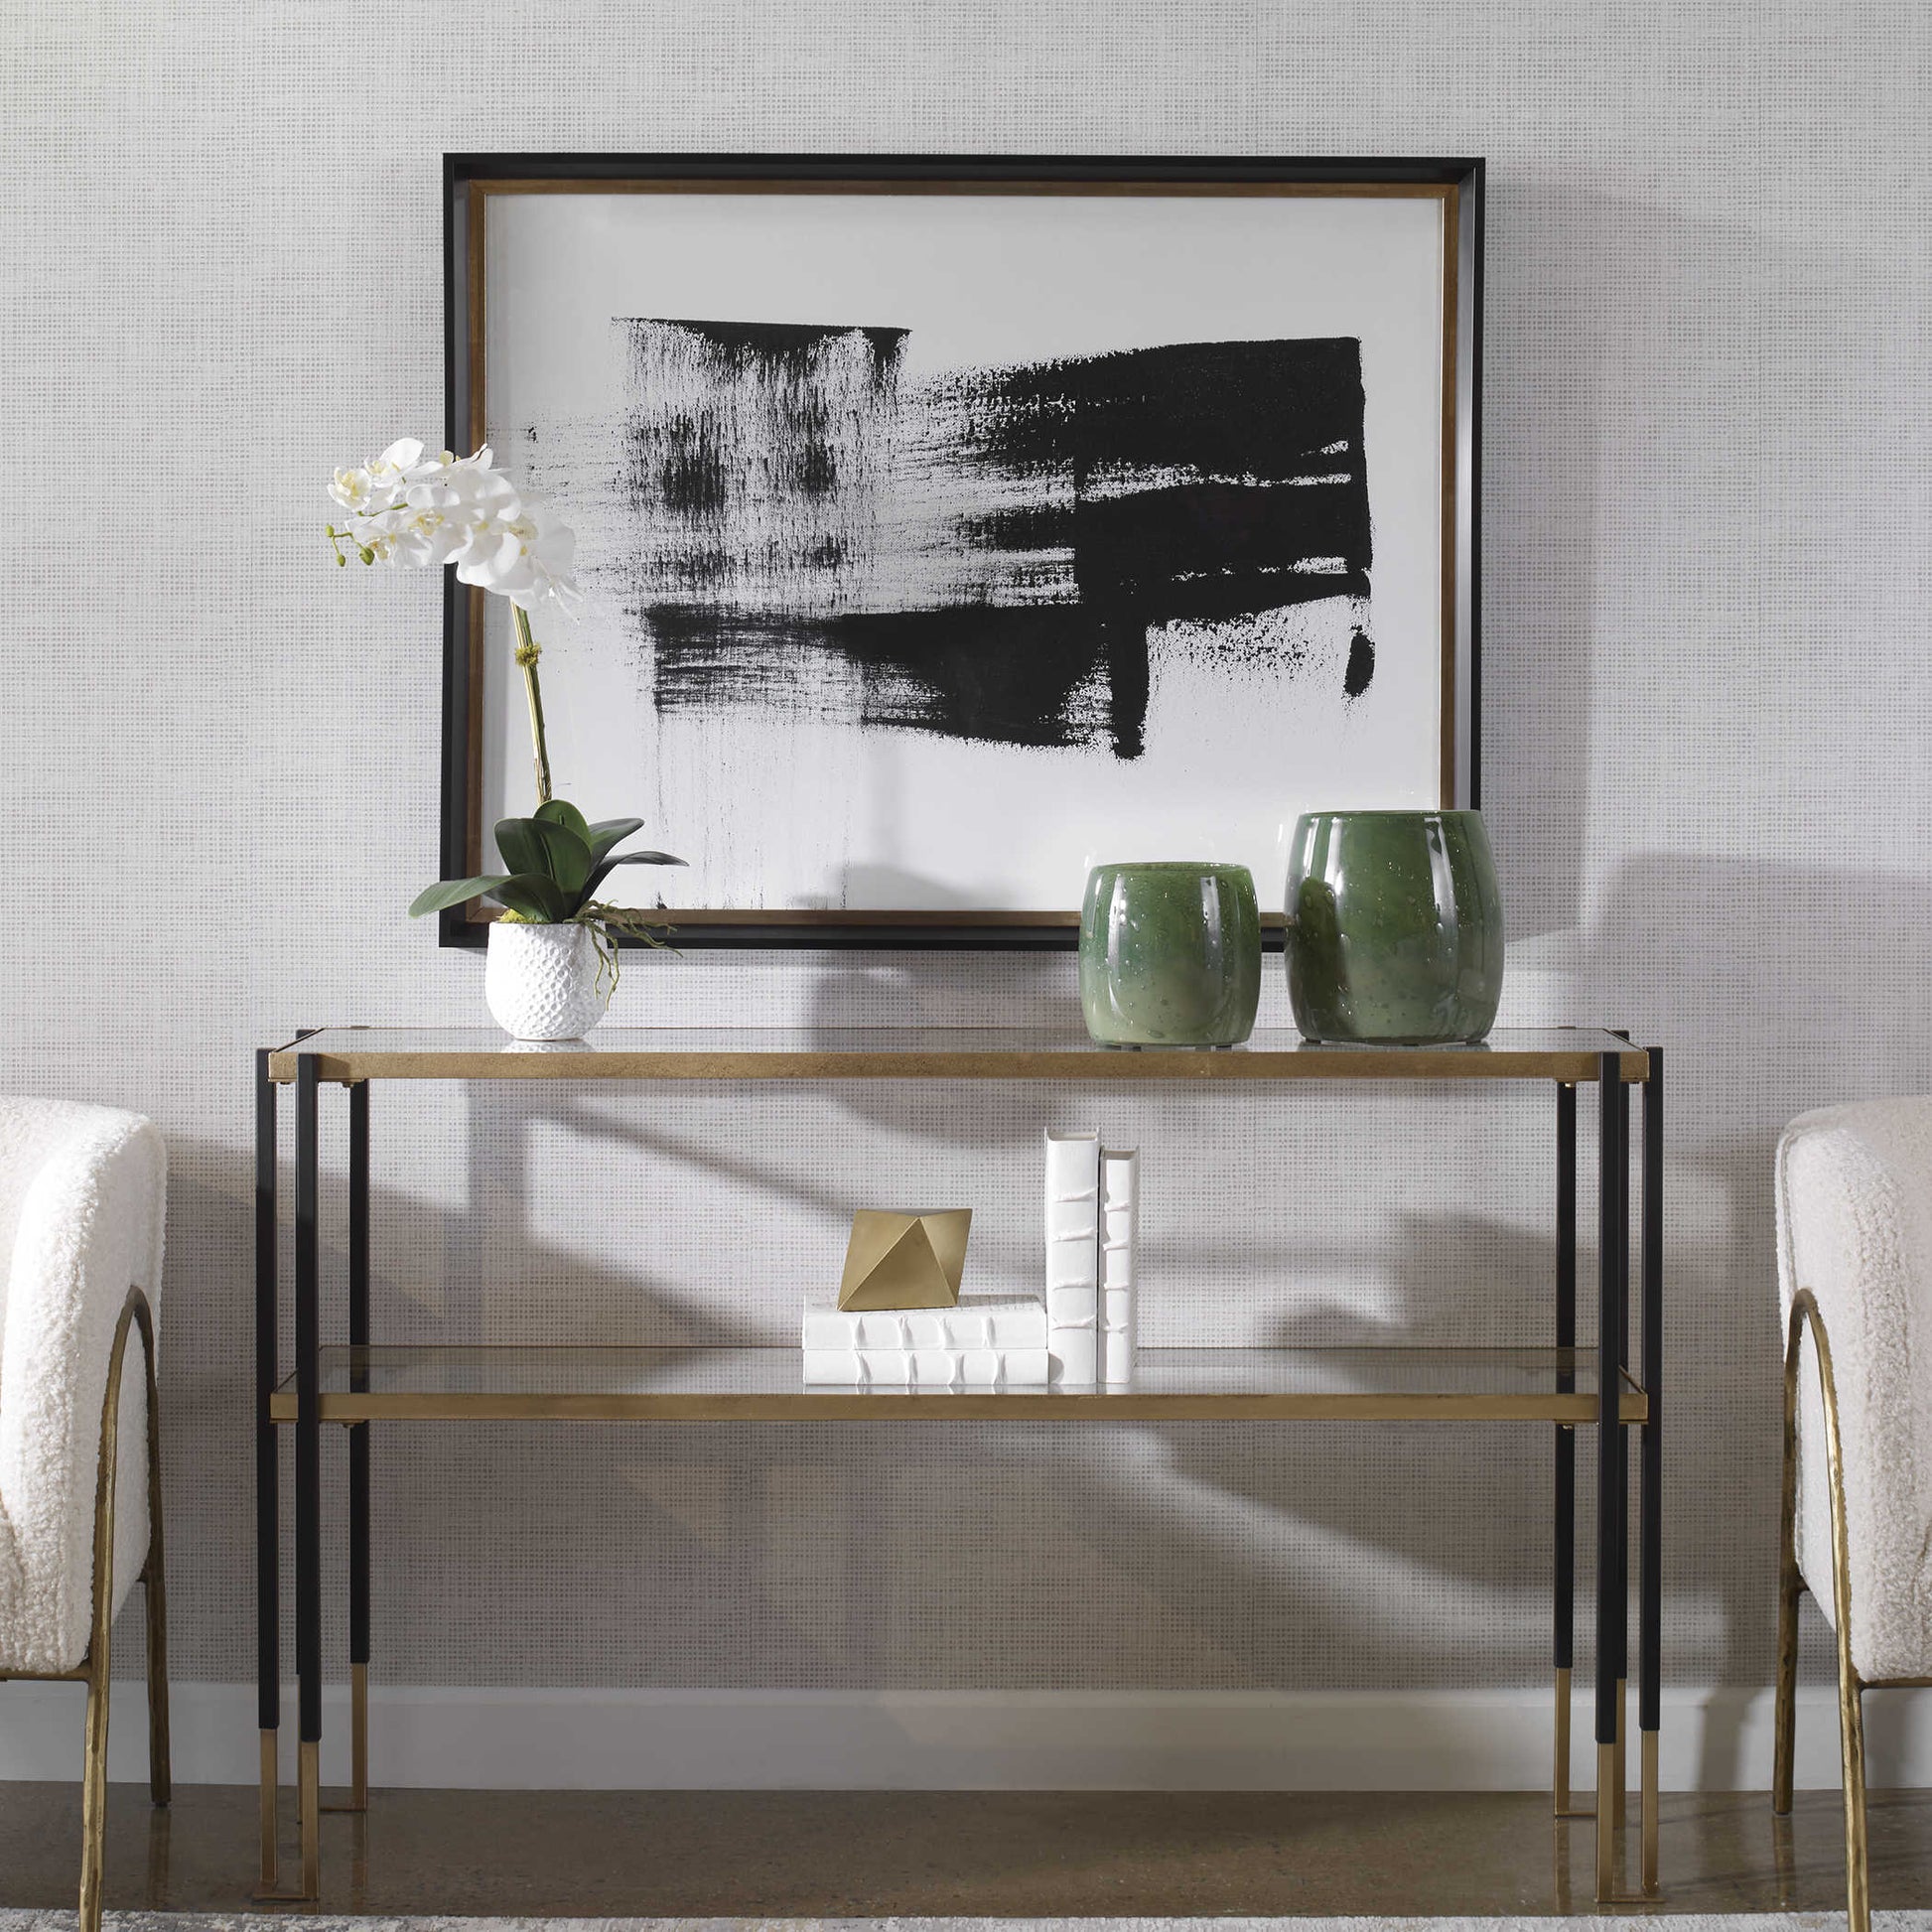 Stunning black and white running man framed print over a glass console in front of some green jars and a white orchid. 